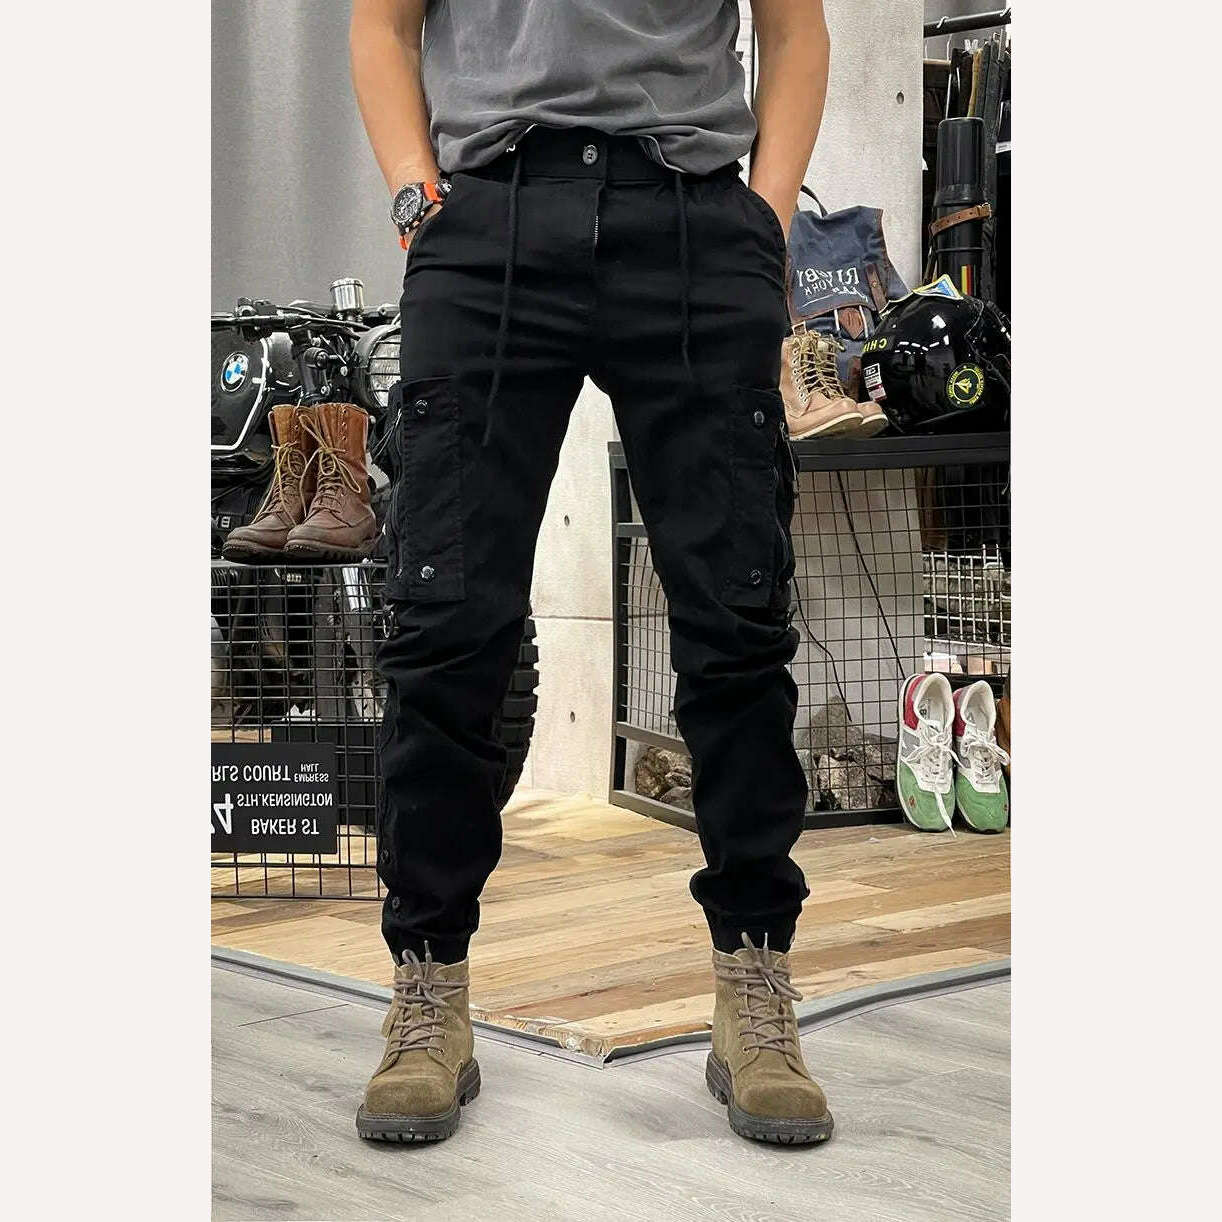 KIMLUD, Camo Navy Trousers Man Harem Y2k Tactical Military Cargo Pants for Men Techwear High Quality Outdoor Hip Hop Work Stacked Slacks, KIMLUD Women's Clothes